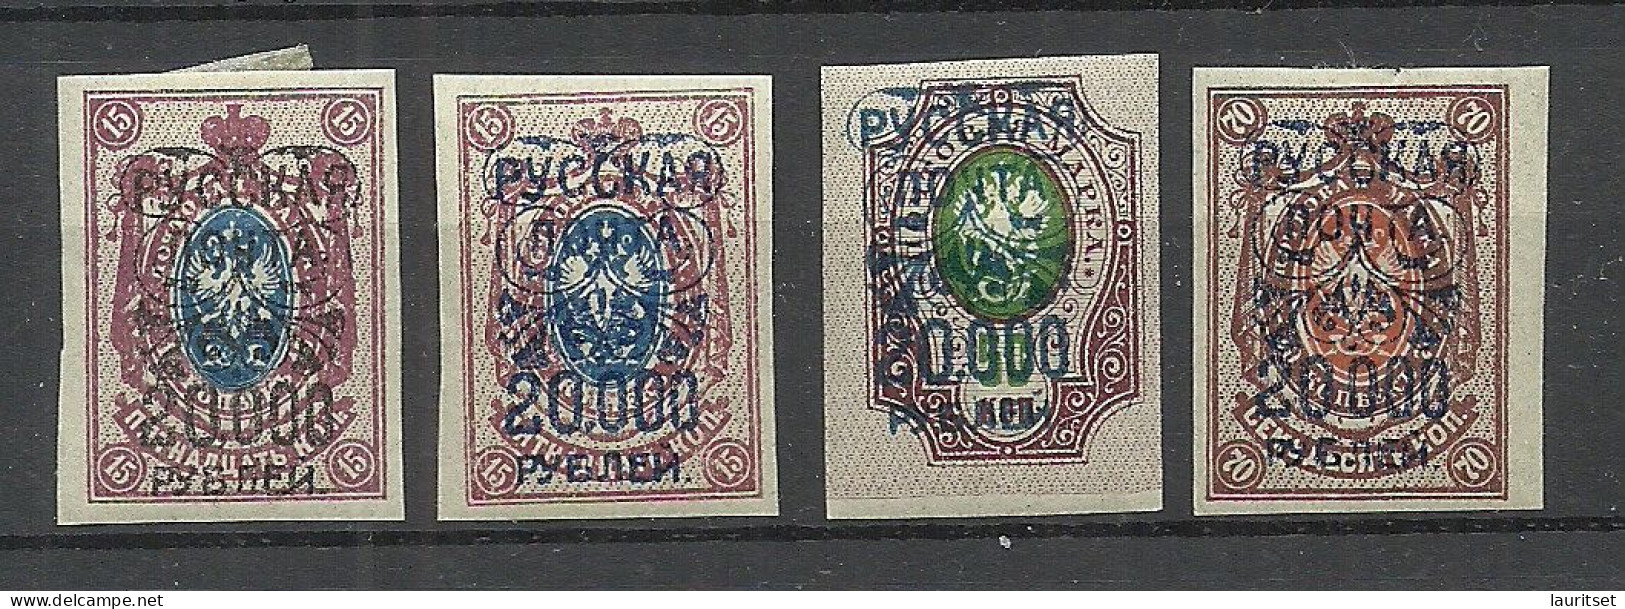 RUSSLAND RUSSIA 1920 Wrangel Army Gallipoli Camp, 4 Imperforated Stamps With OPT 20 000 * - Wrangel Army